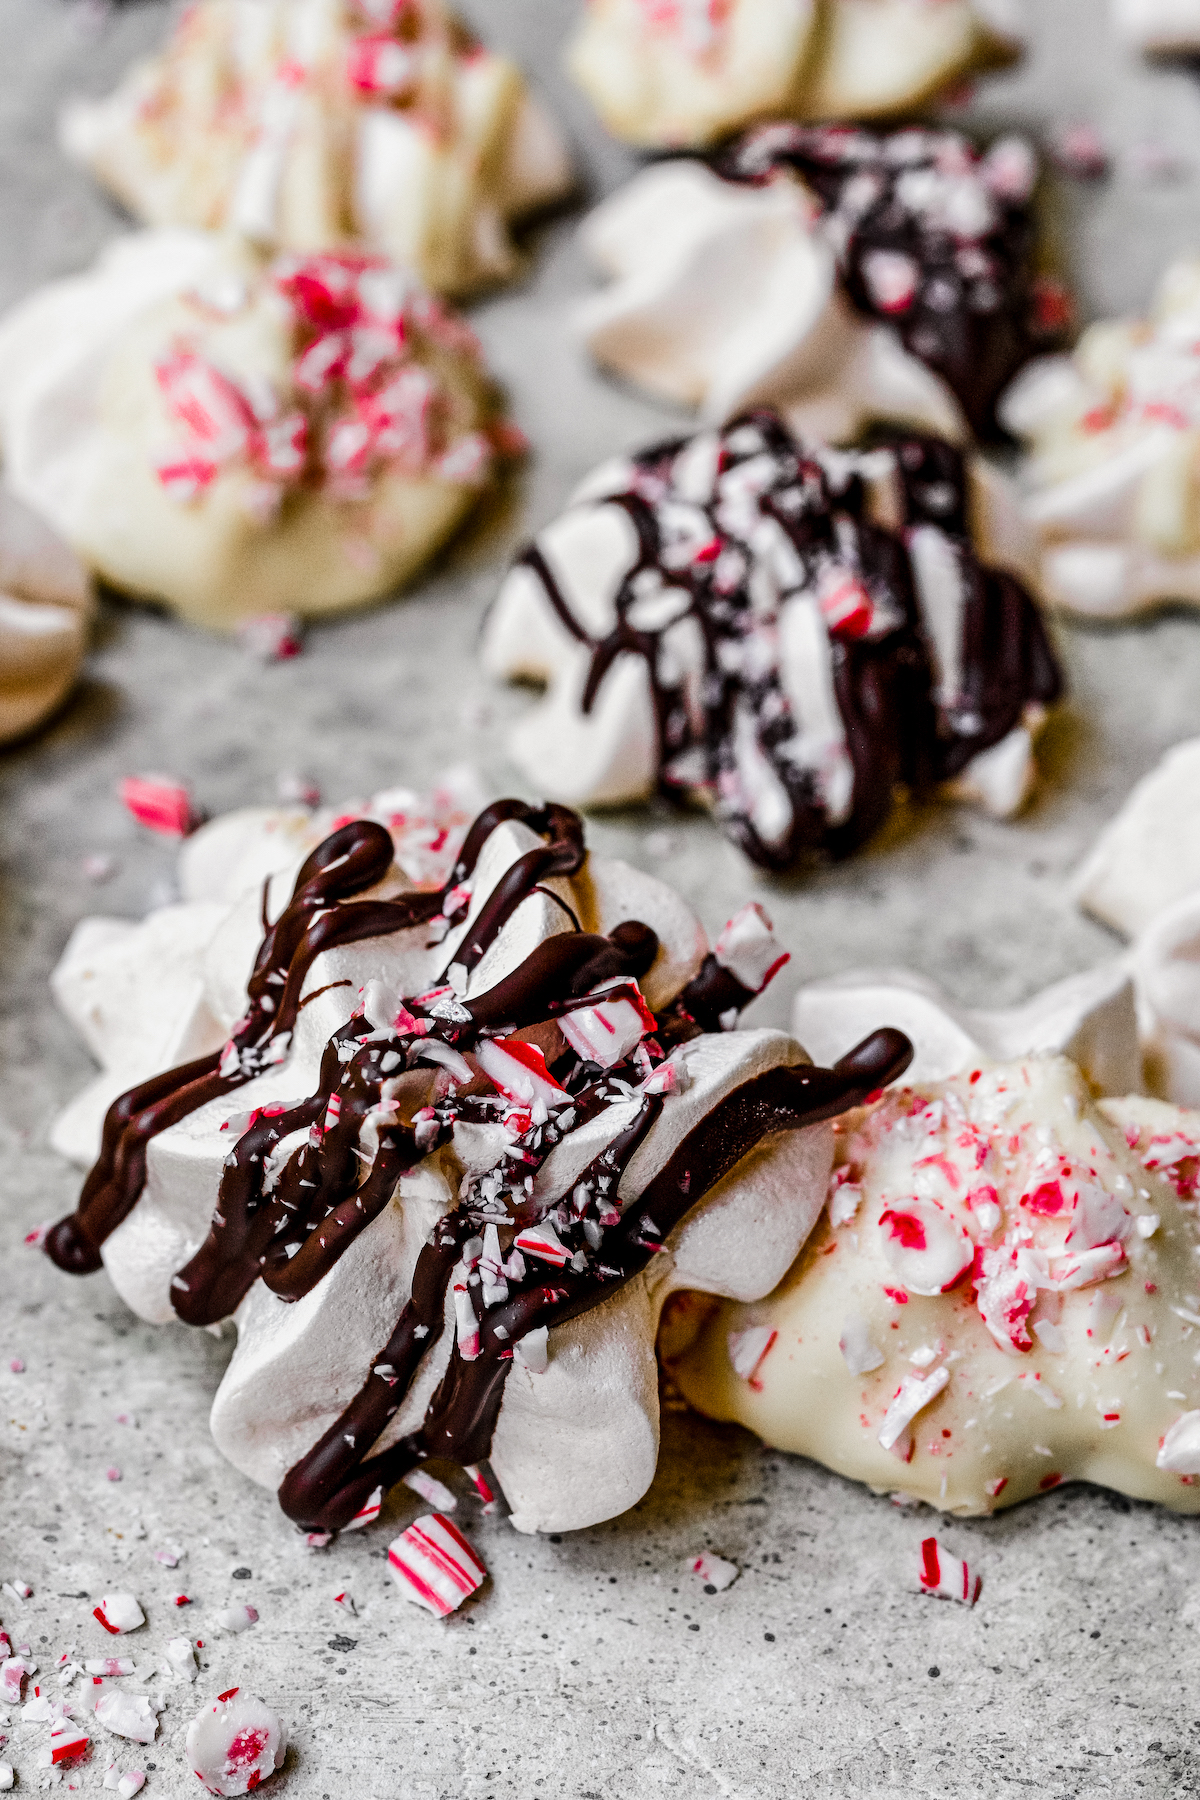 Christmas meringue cookies with chocolate drizzle and candy cane sprinkles.